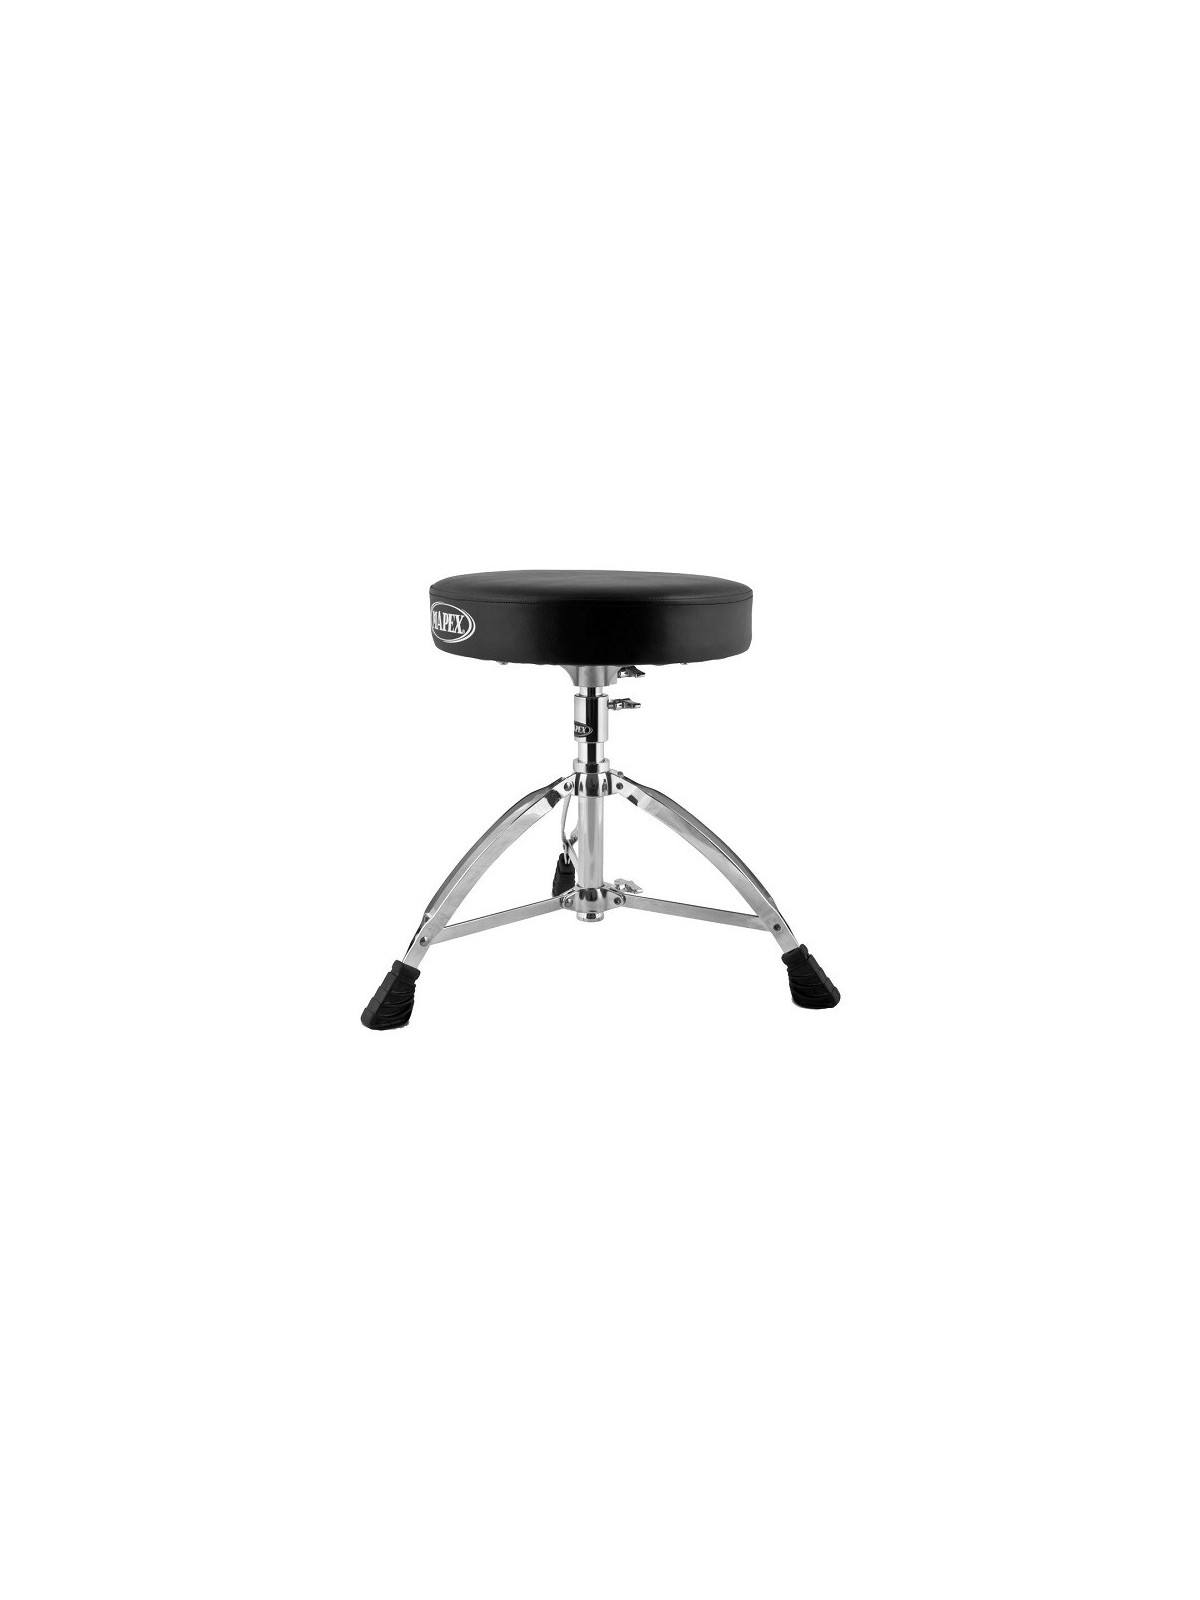 Mapex T561A tabouret assise ronde